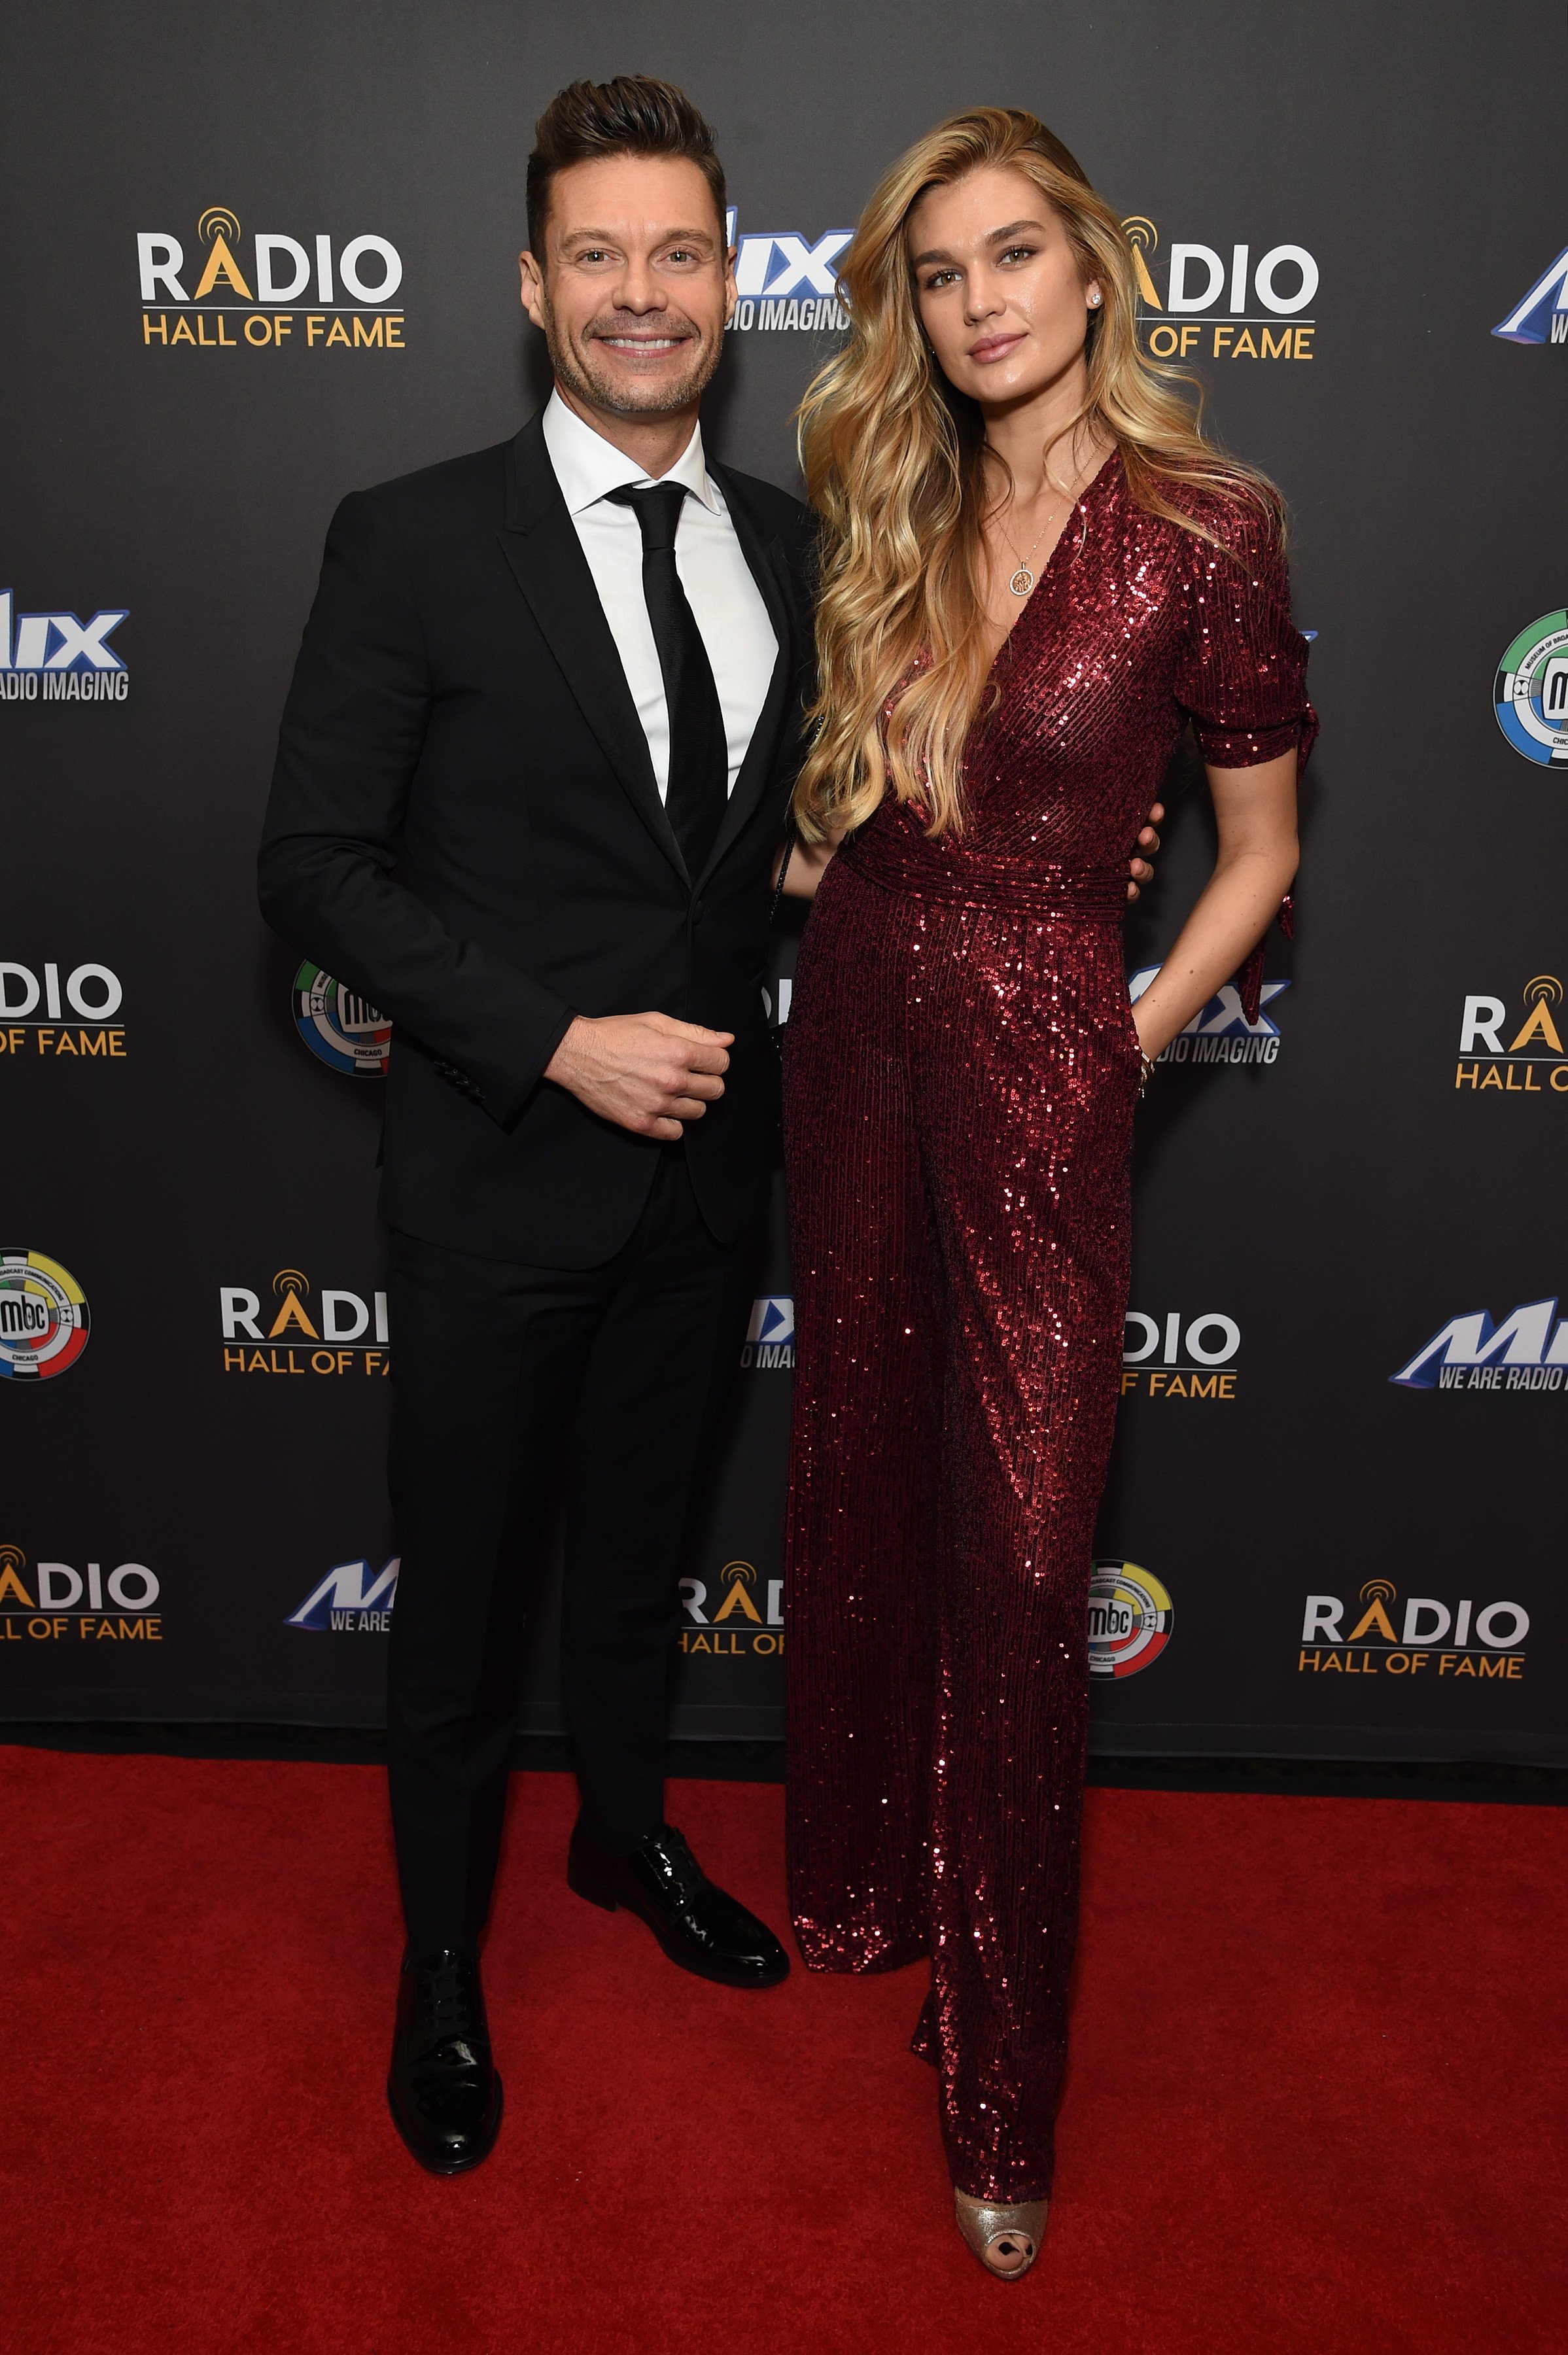 Inductee Ryan Seacrest and Shayna Taylor attend the Radio Hall of Fame Class of 2019 Induction Ceremony at Gotham Hall on November 08, 2019 in New York City. | Source: Getty Images